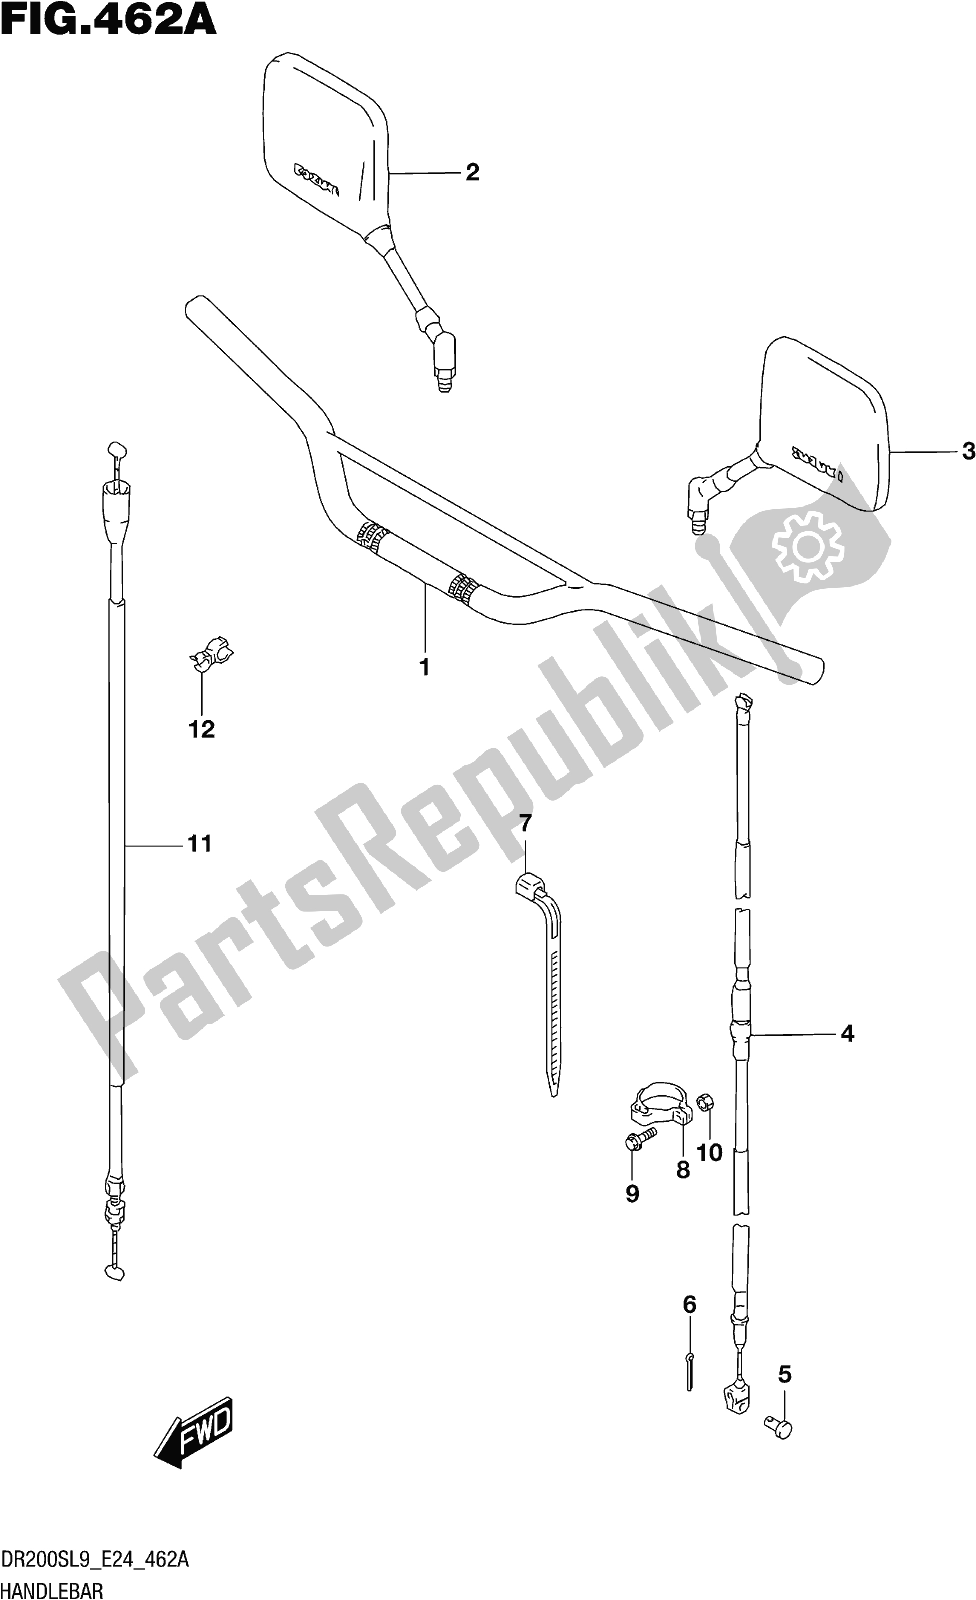 All parts for the Fig. 462a Handlebar of the Suzuki DR 200S 2019